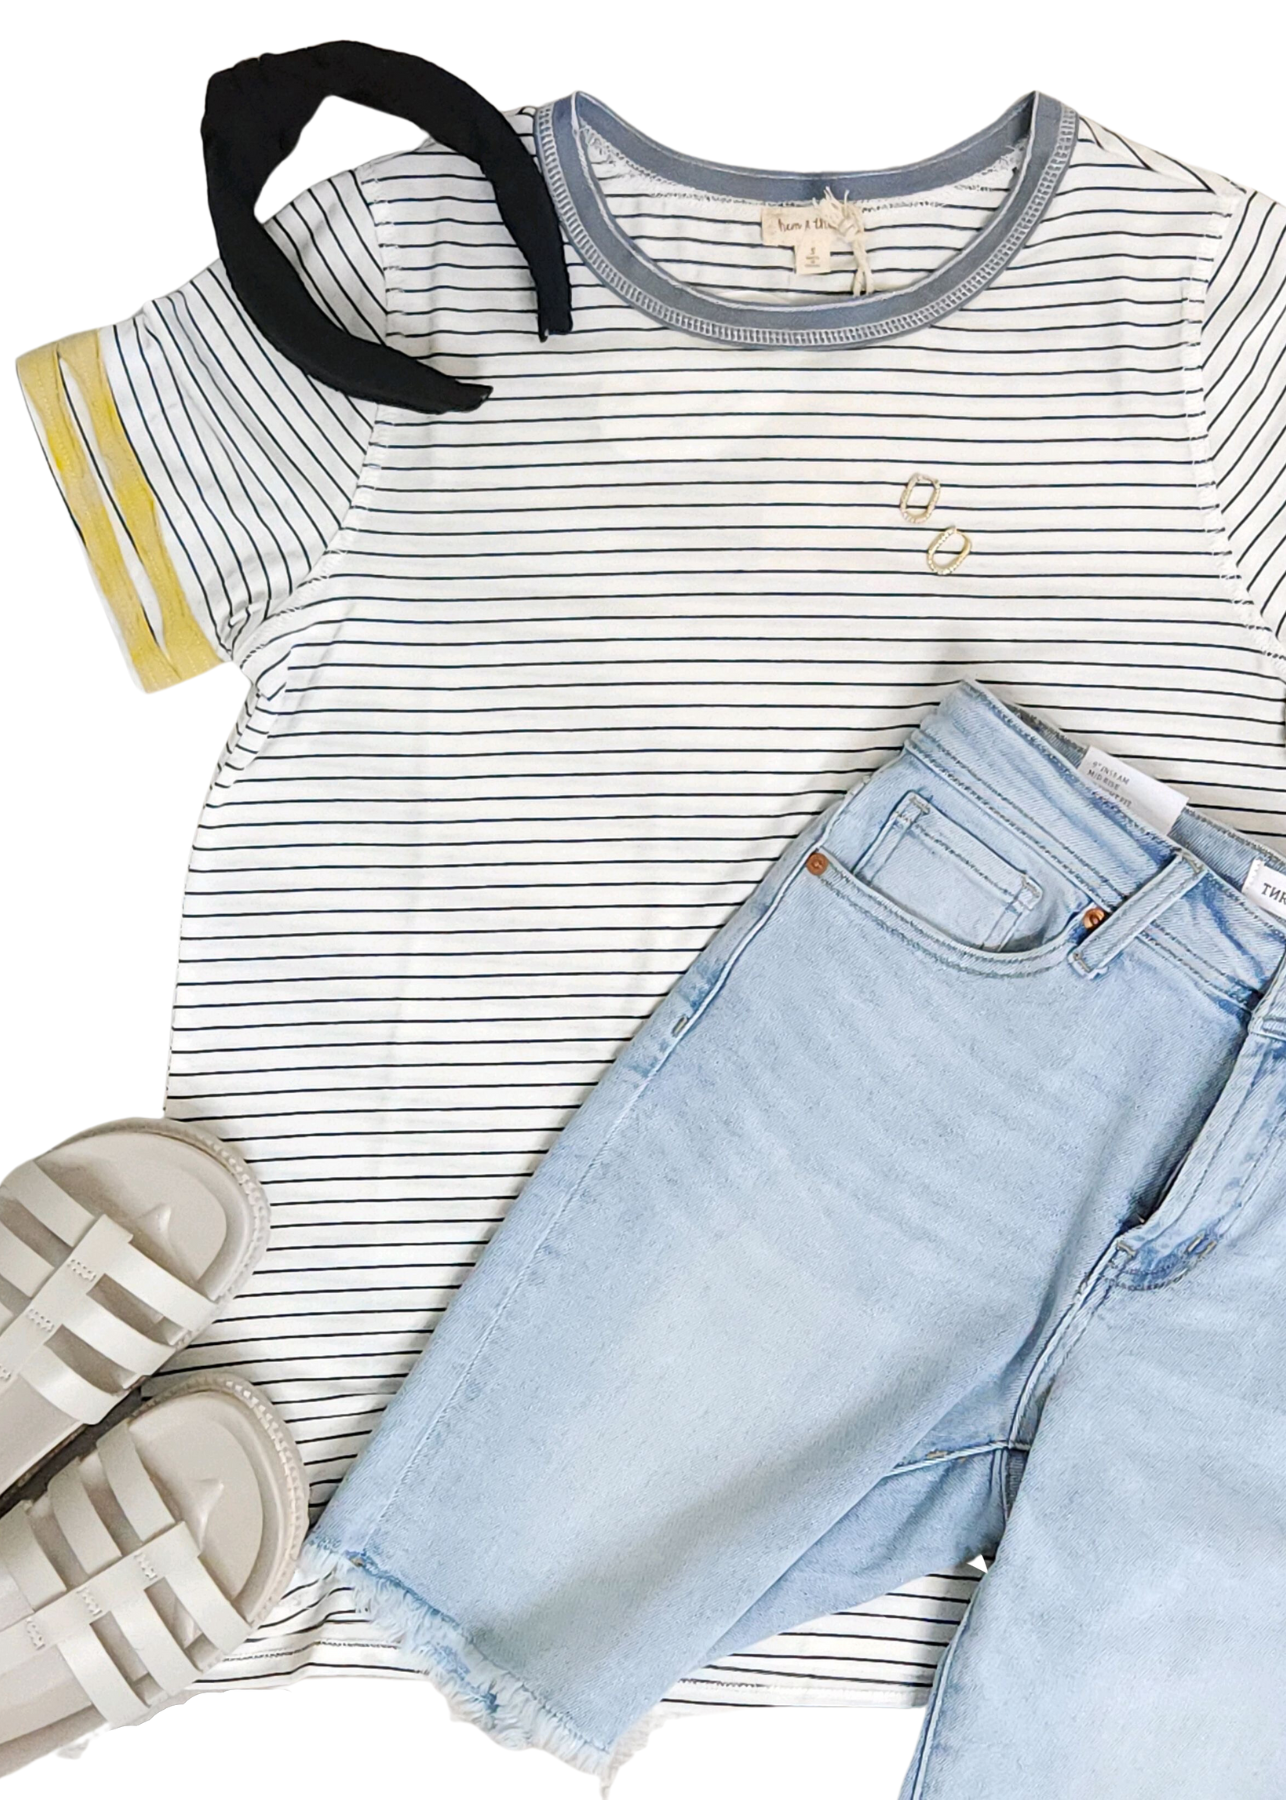 White Stripe T-shirt with yellow trim on sleeves paired with light wash denim shorts.